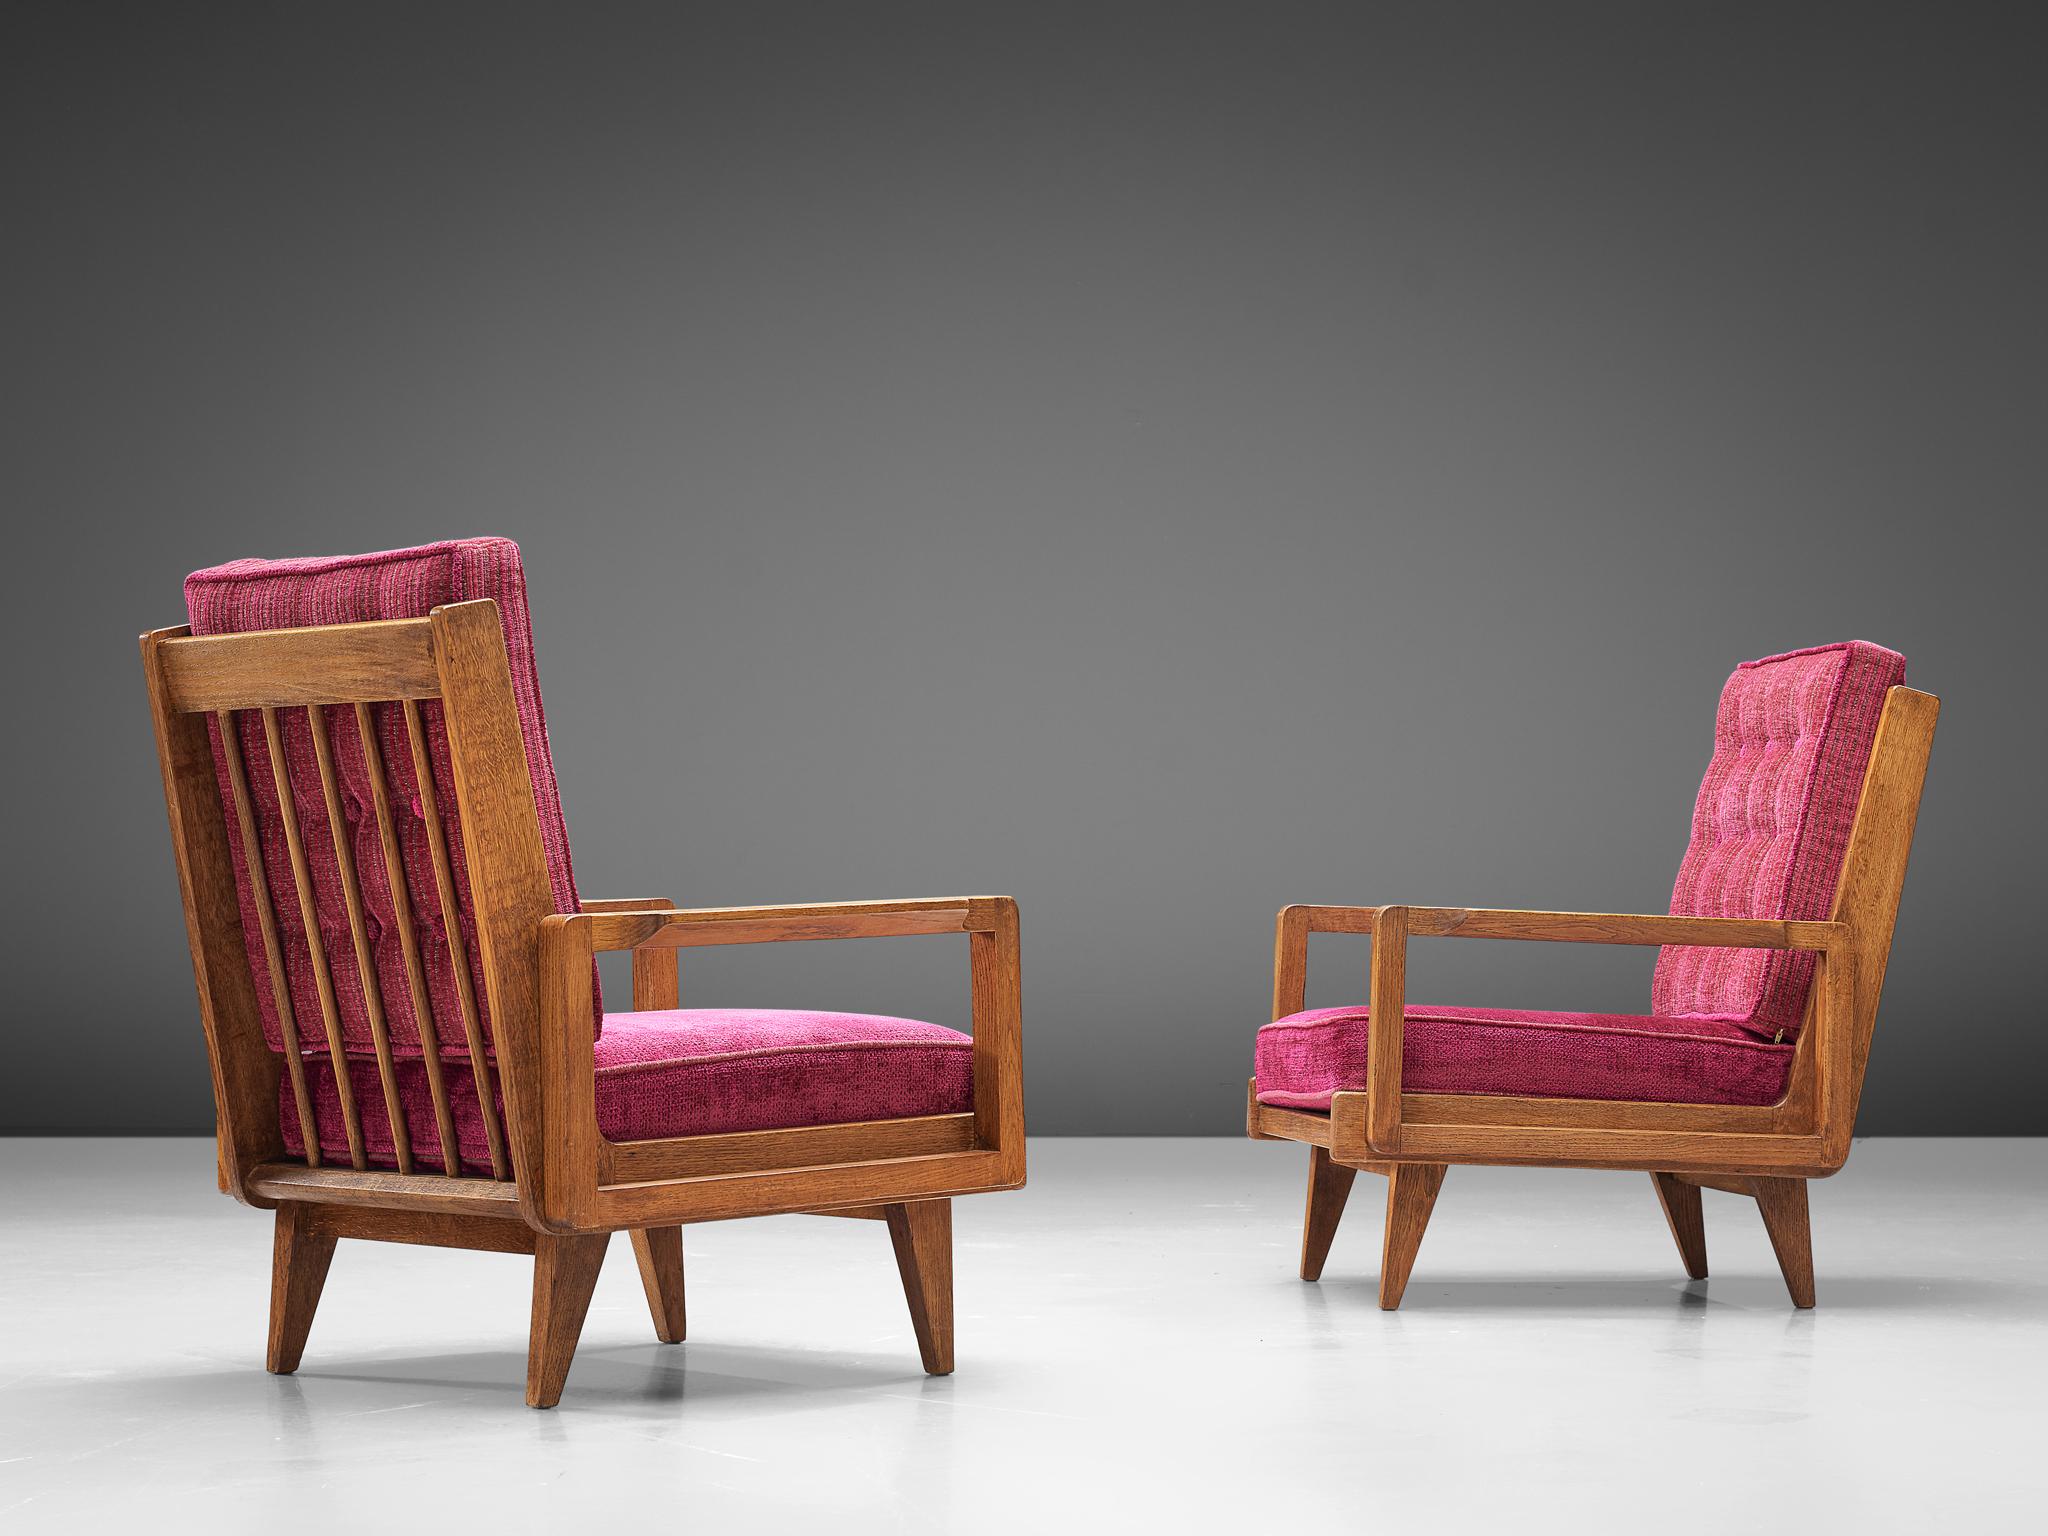 Guillerme et Chambron, pair of easy chairs, pink fabric, oak, France, 1950s

A sculptural pair of easy chairs by Guillerme and Chambron that is very well executed and made out of solid, carved oak. These armchairs feature an interesting open